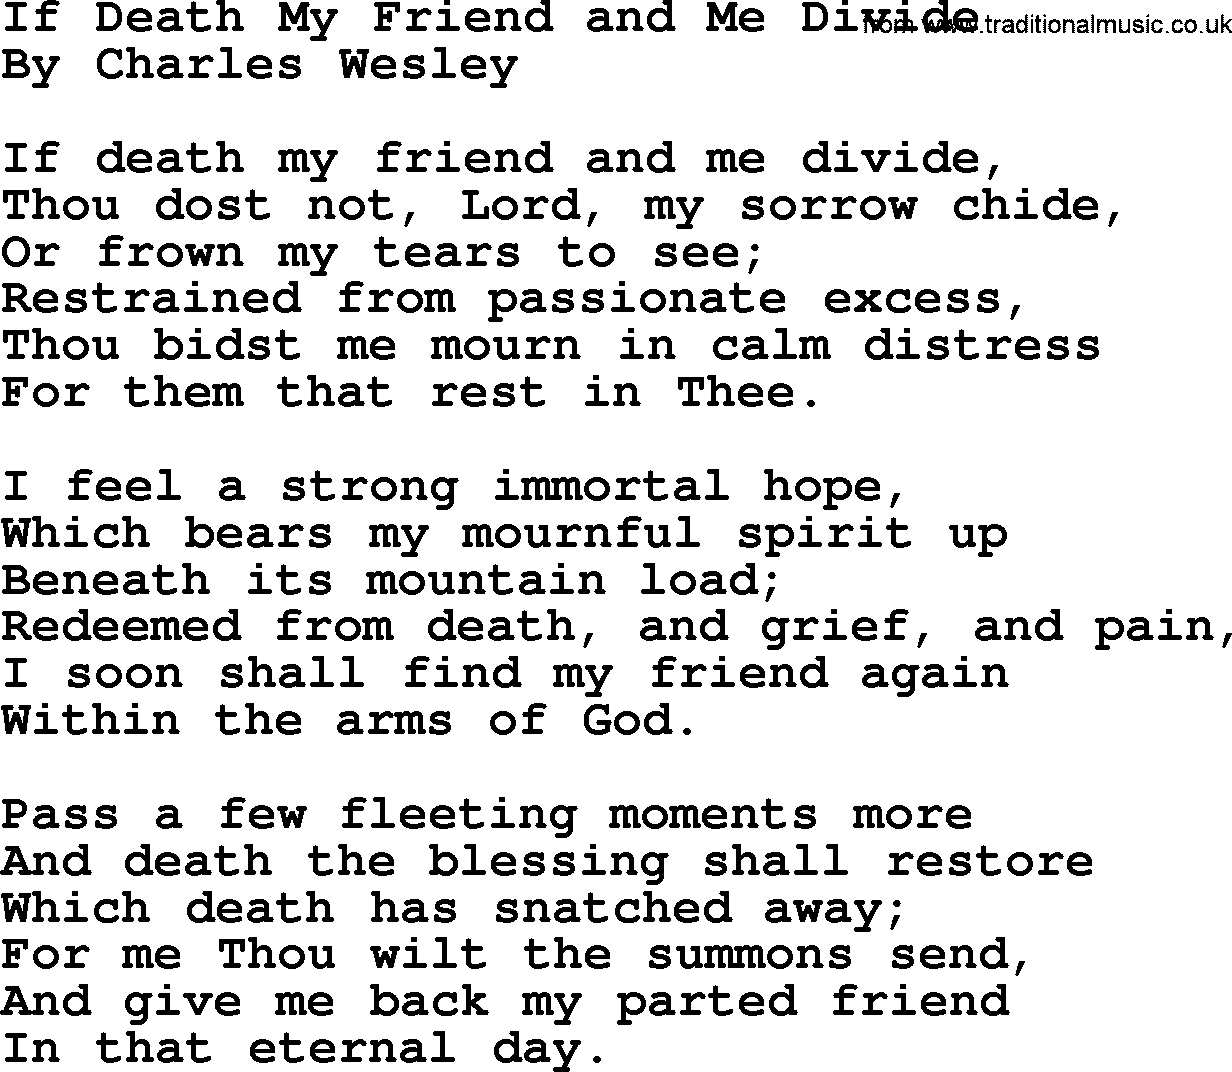 Charles Wesley hymn: If Death My Friend and Me Divide, lyrics